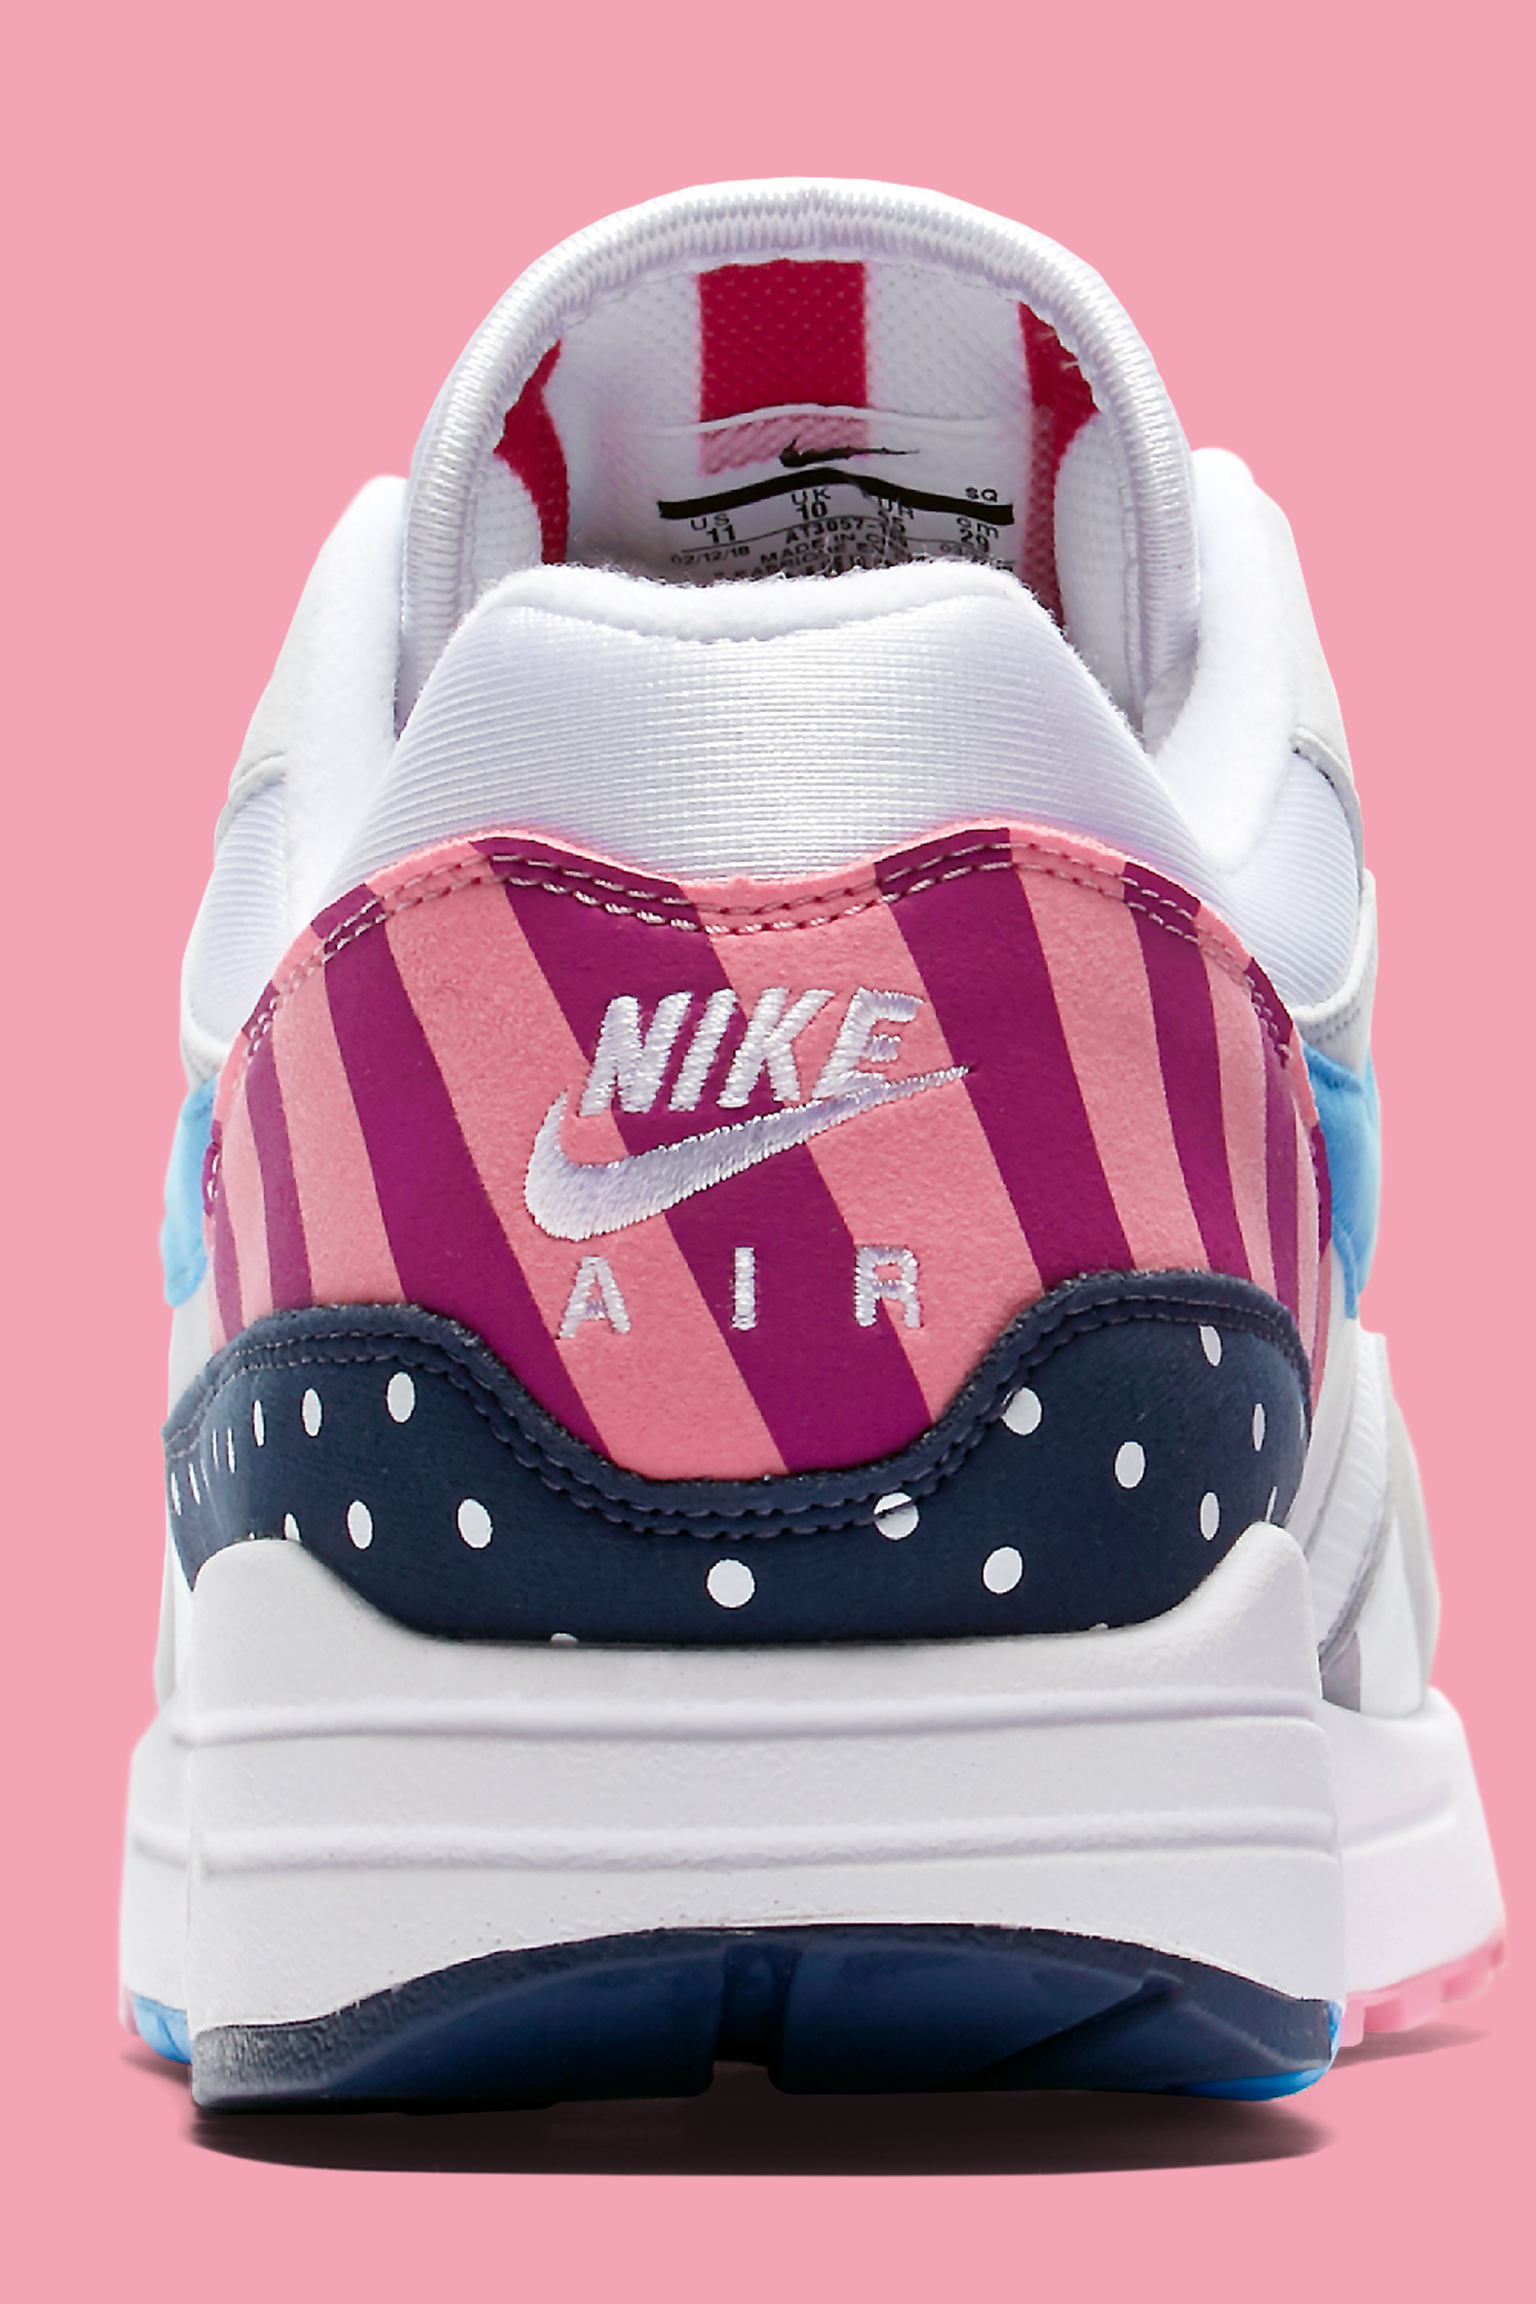 Nike Air Max 1 'Parra' 2018 Release Date.. Nike SNKRS